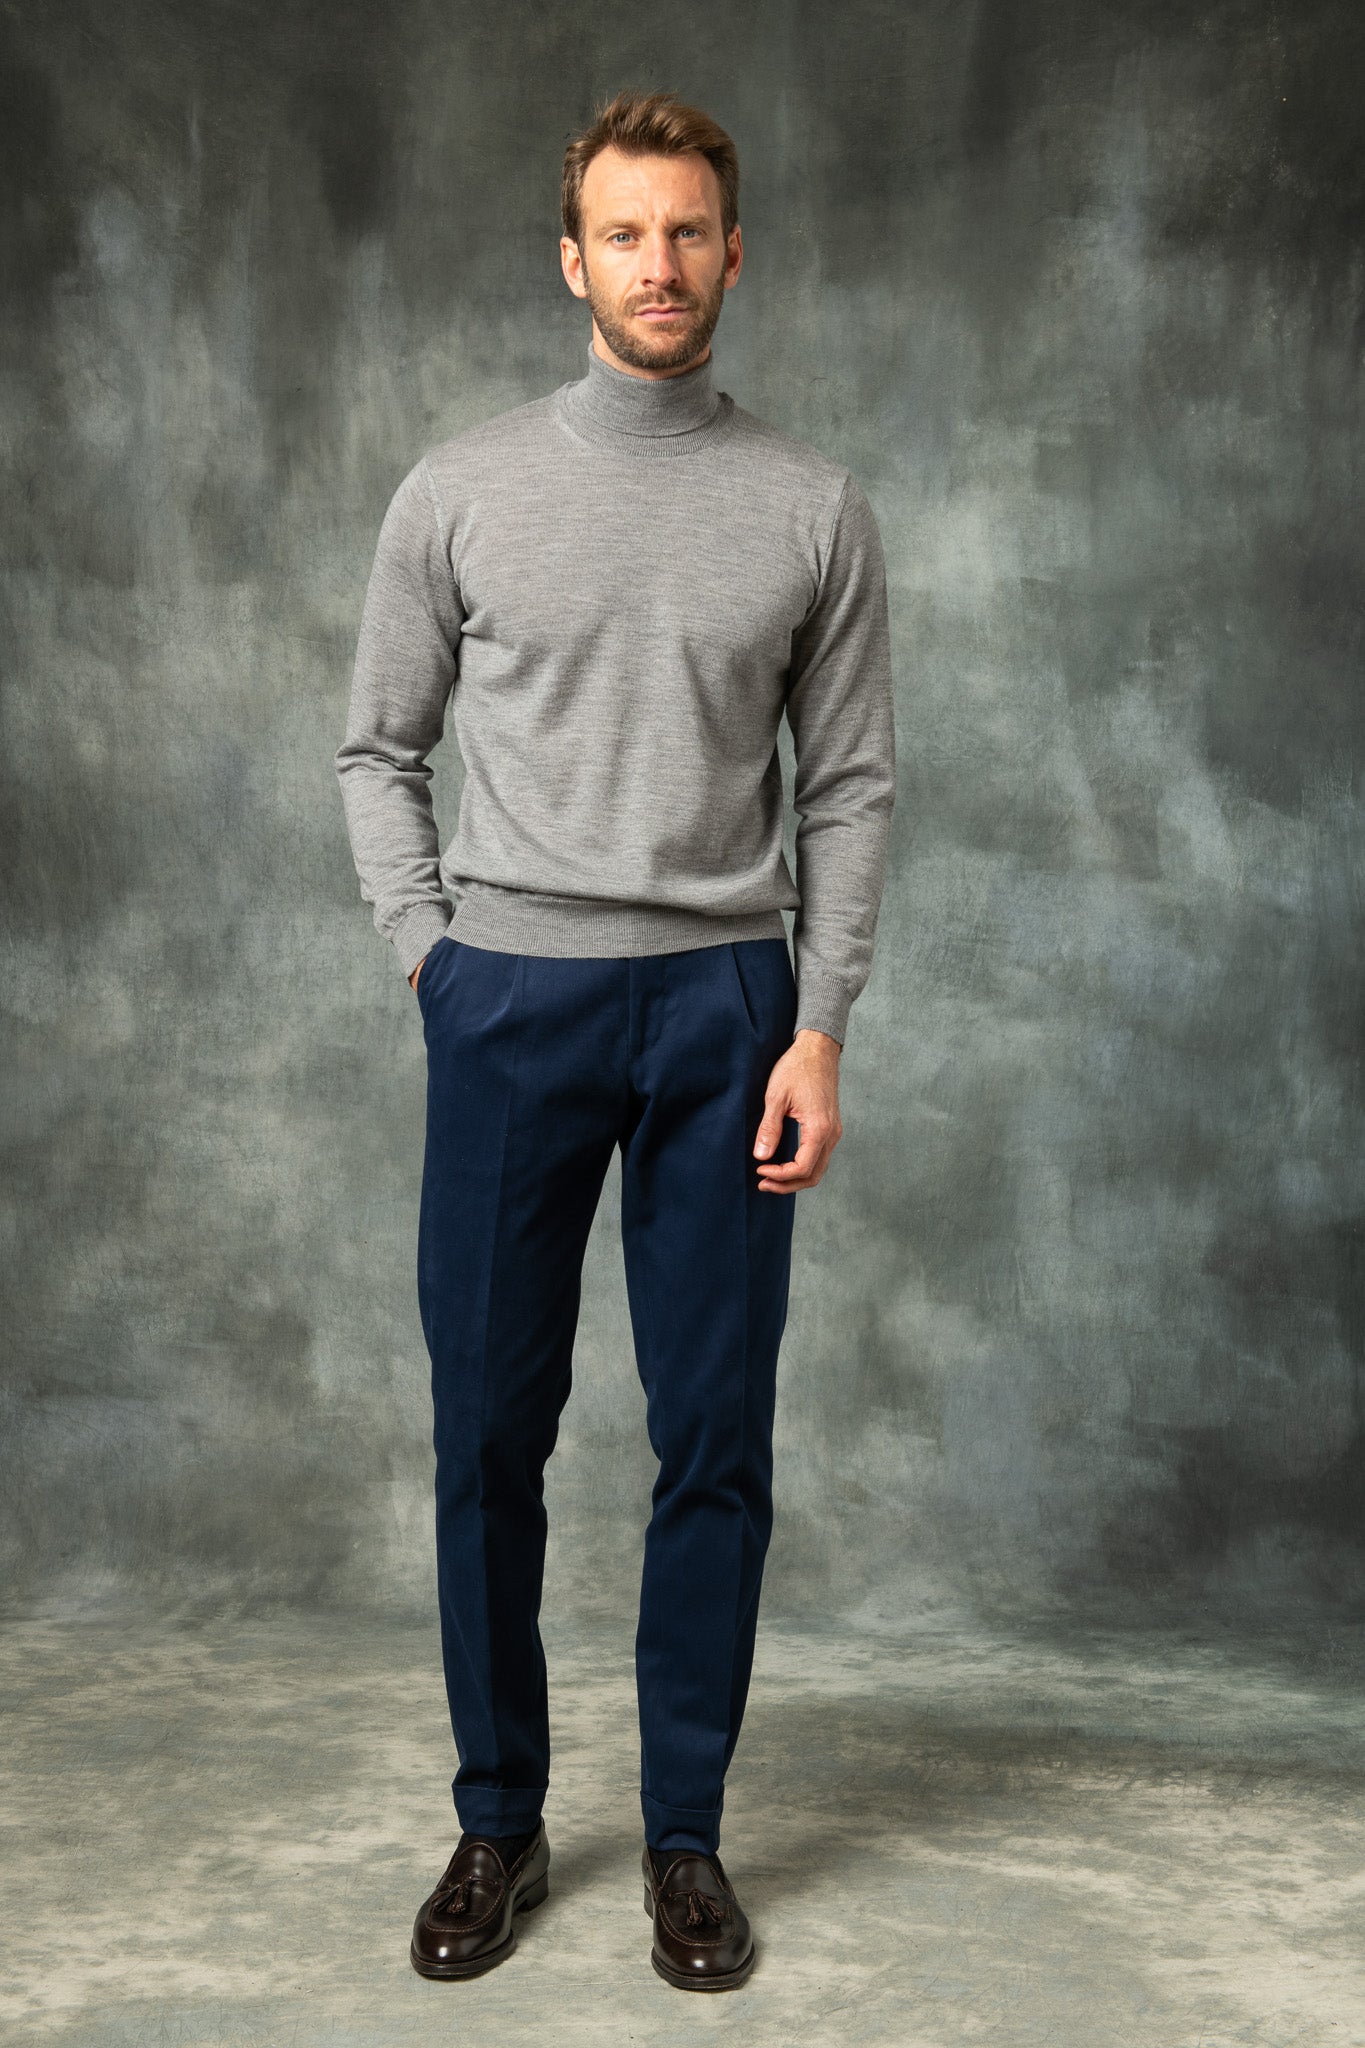 Blue Cotton Biella Trousers  - Made in Italy